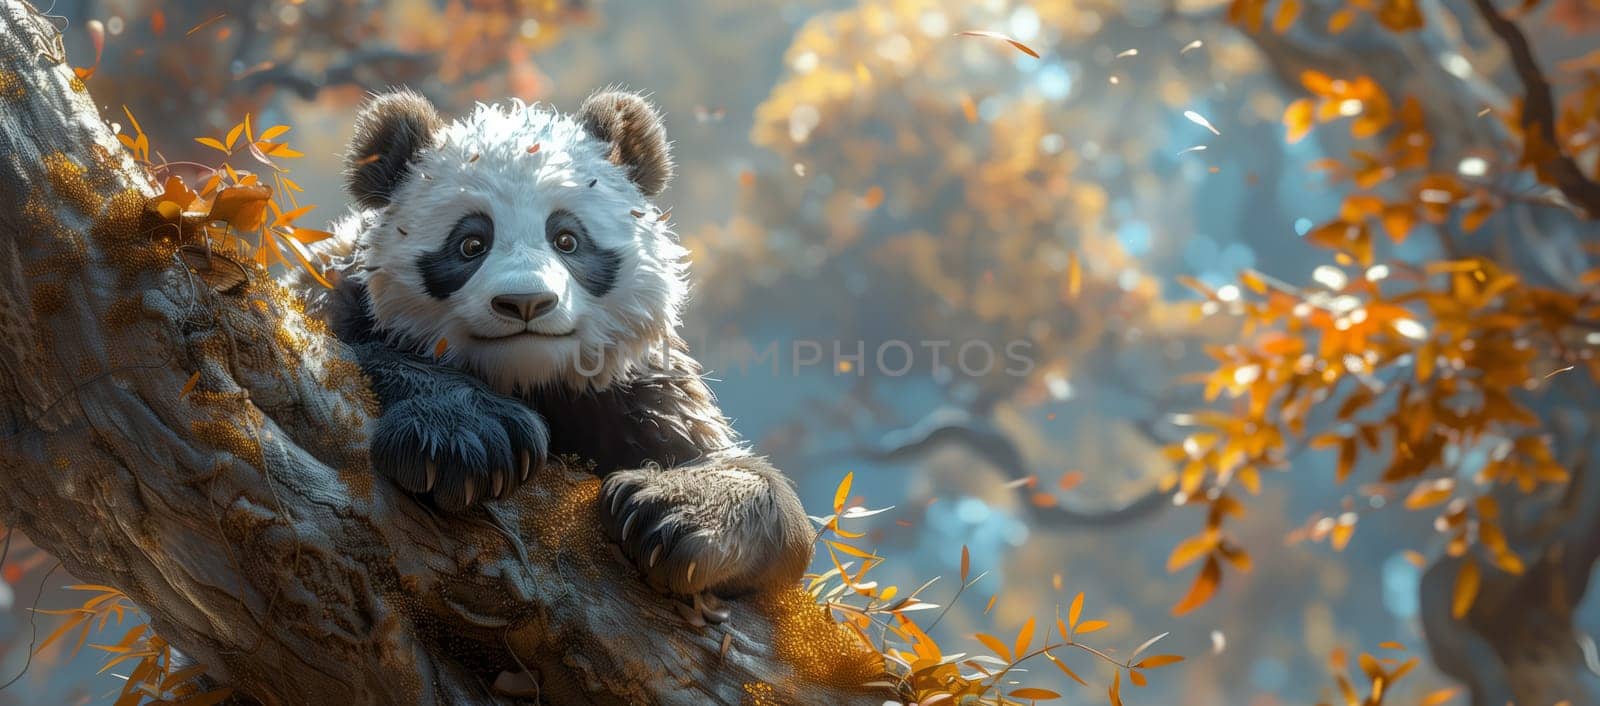 A Canidae carnivore, panda bear, with fur, sitting on a tree branch in a natural landscape forest. A terrestrial animal in a wildlife environment